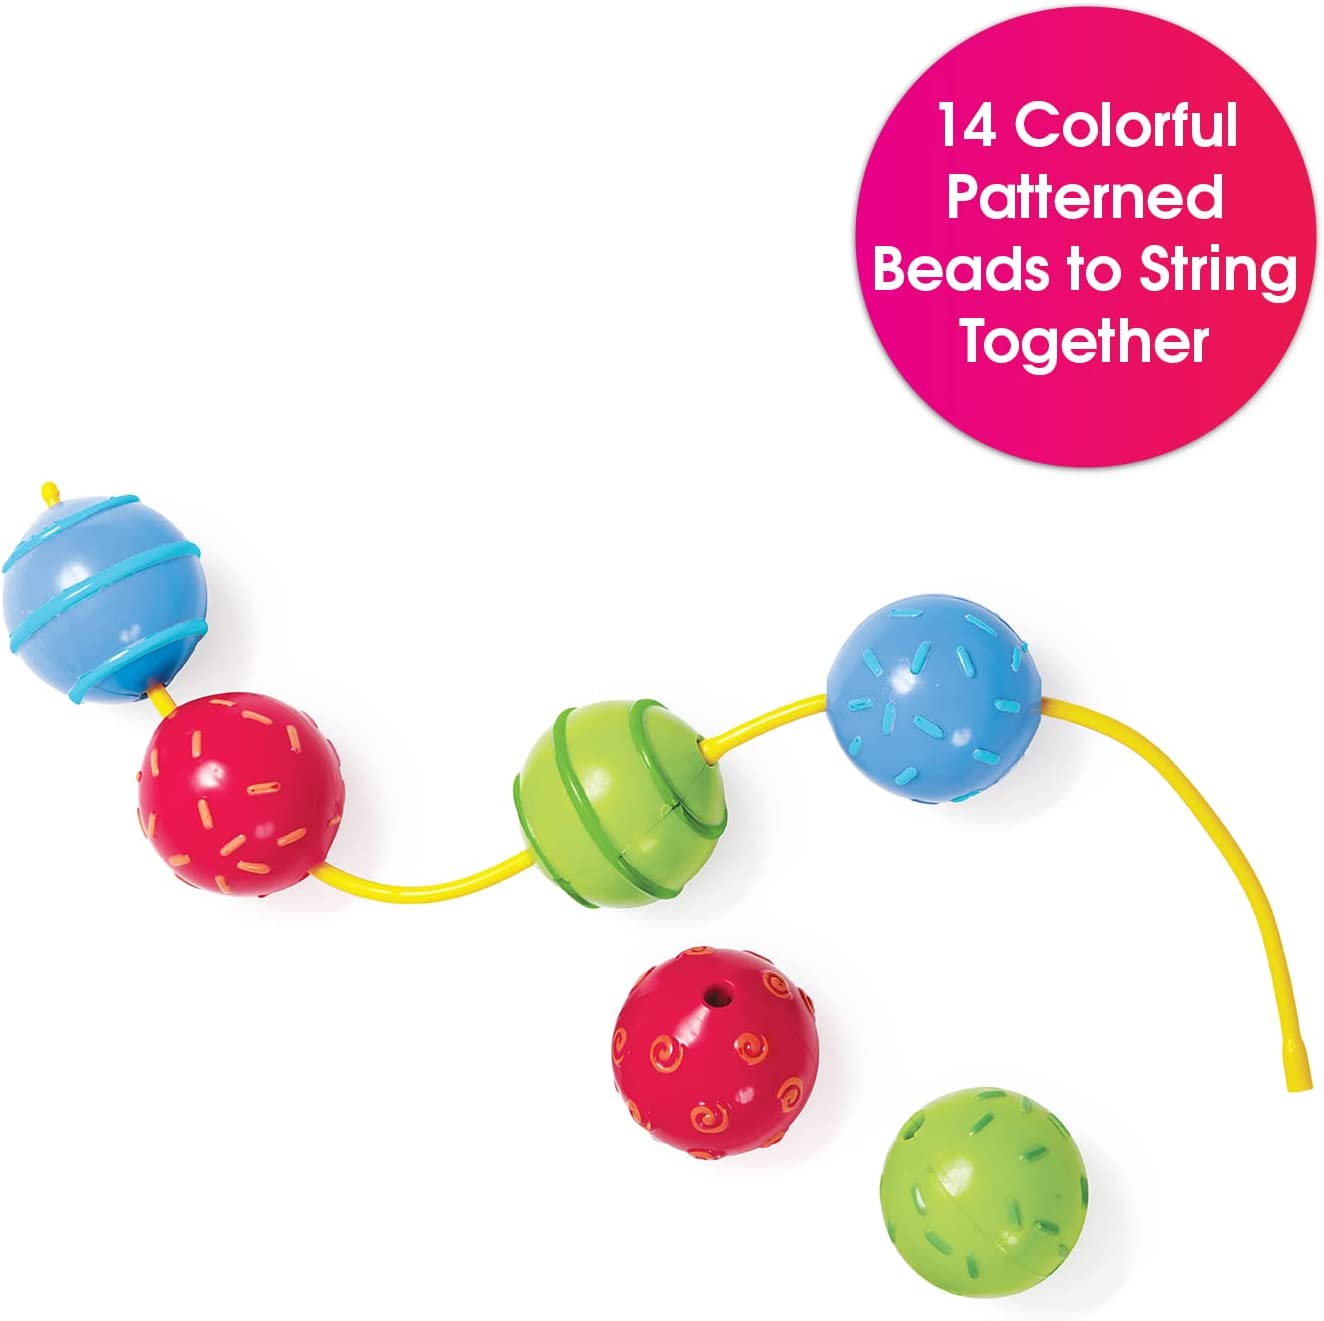 Edushape Baby Beads, Touch, feel and thread with Edushape Baby Beads! An ideal discovery and manipulative toy, Baby Beads help toddlers to develop dexterity and fine motor skills. The Edushape Baby Beads features raised sensory textures for added grip, each bead can be easily threaded onto one of four 15cm baby-safe laces, which include safety release connectors for added safety. The Edushape Baby Beads provide hours of fun for toddlers who can enjoy rolling the beads, threading and lacing or simply feeling